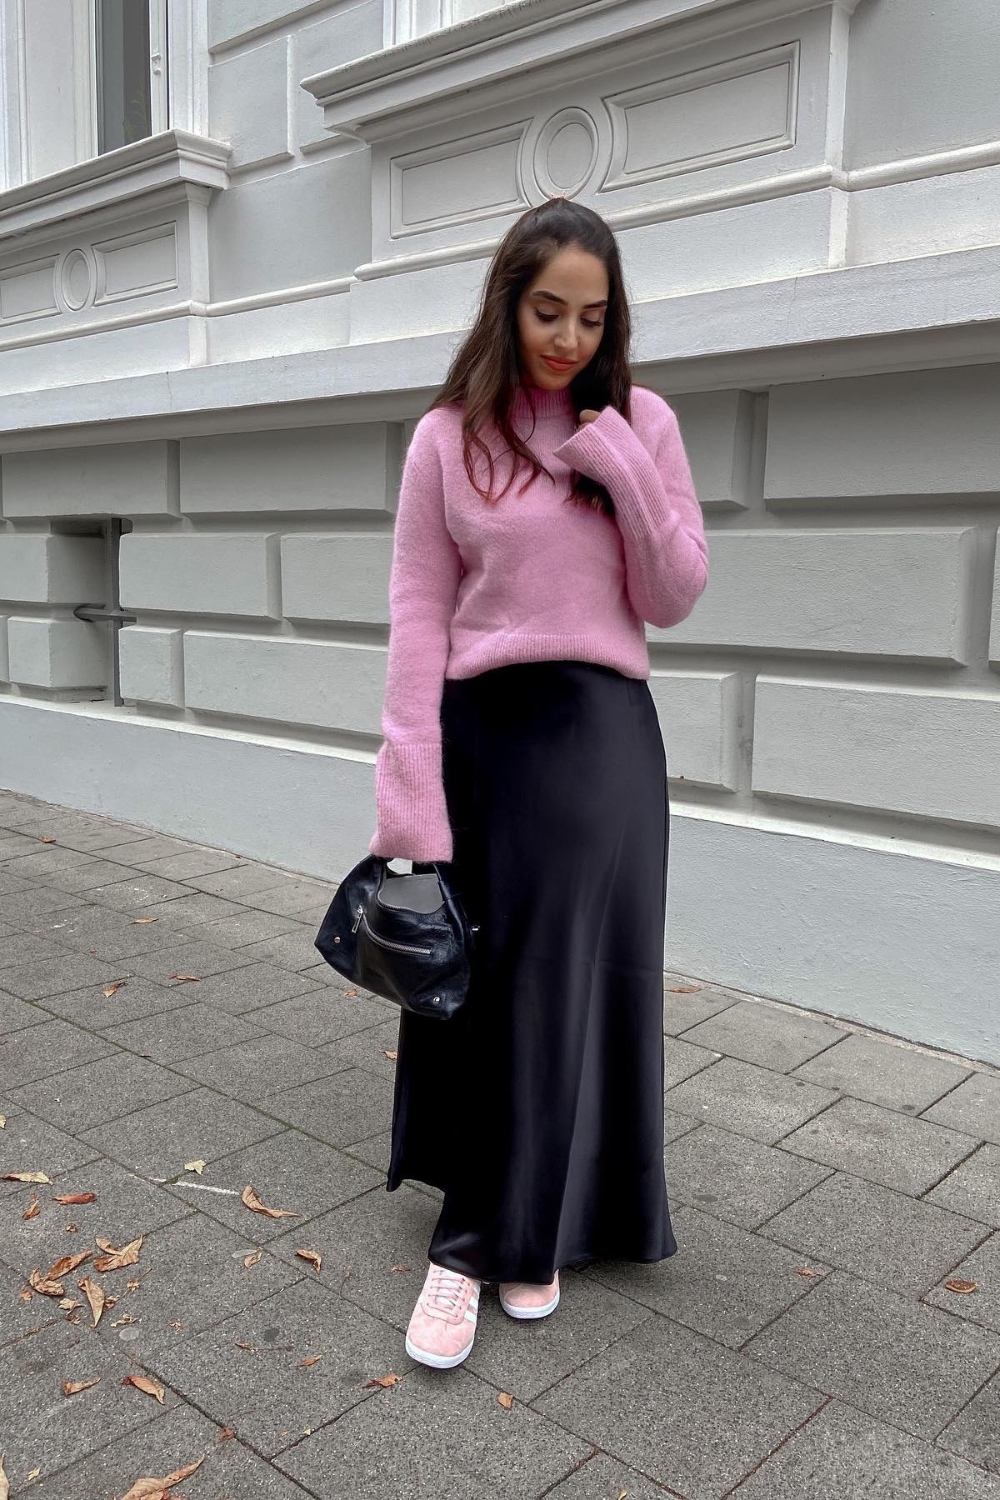 Casual Spring Outfit Ideas - maxi skirt with sneakers